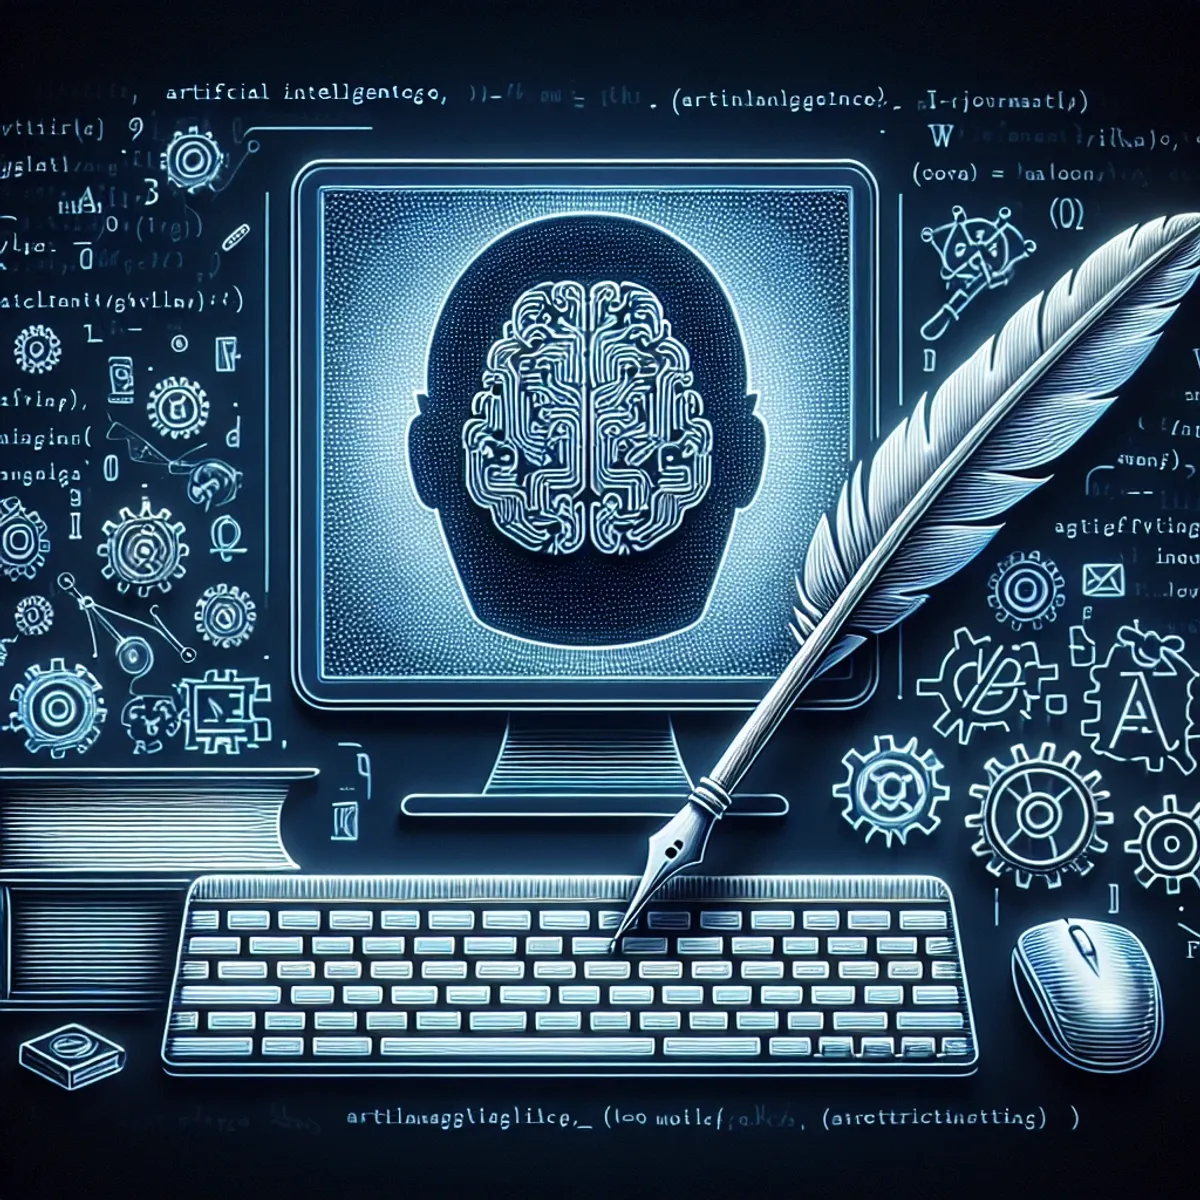 An image of a computer with a glowing brain on the screen, a feather quill pointing at the screen, and gears and code symbols in the background.